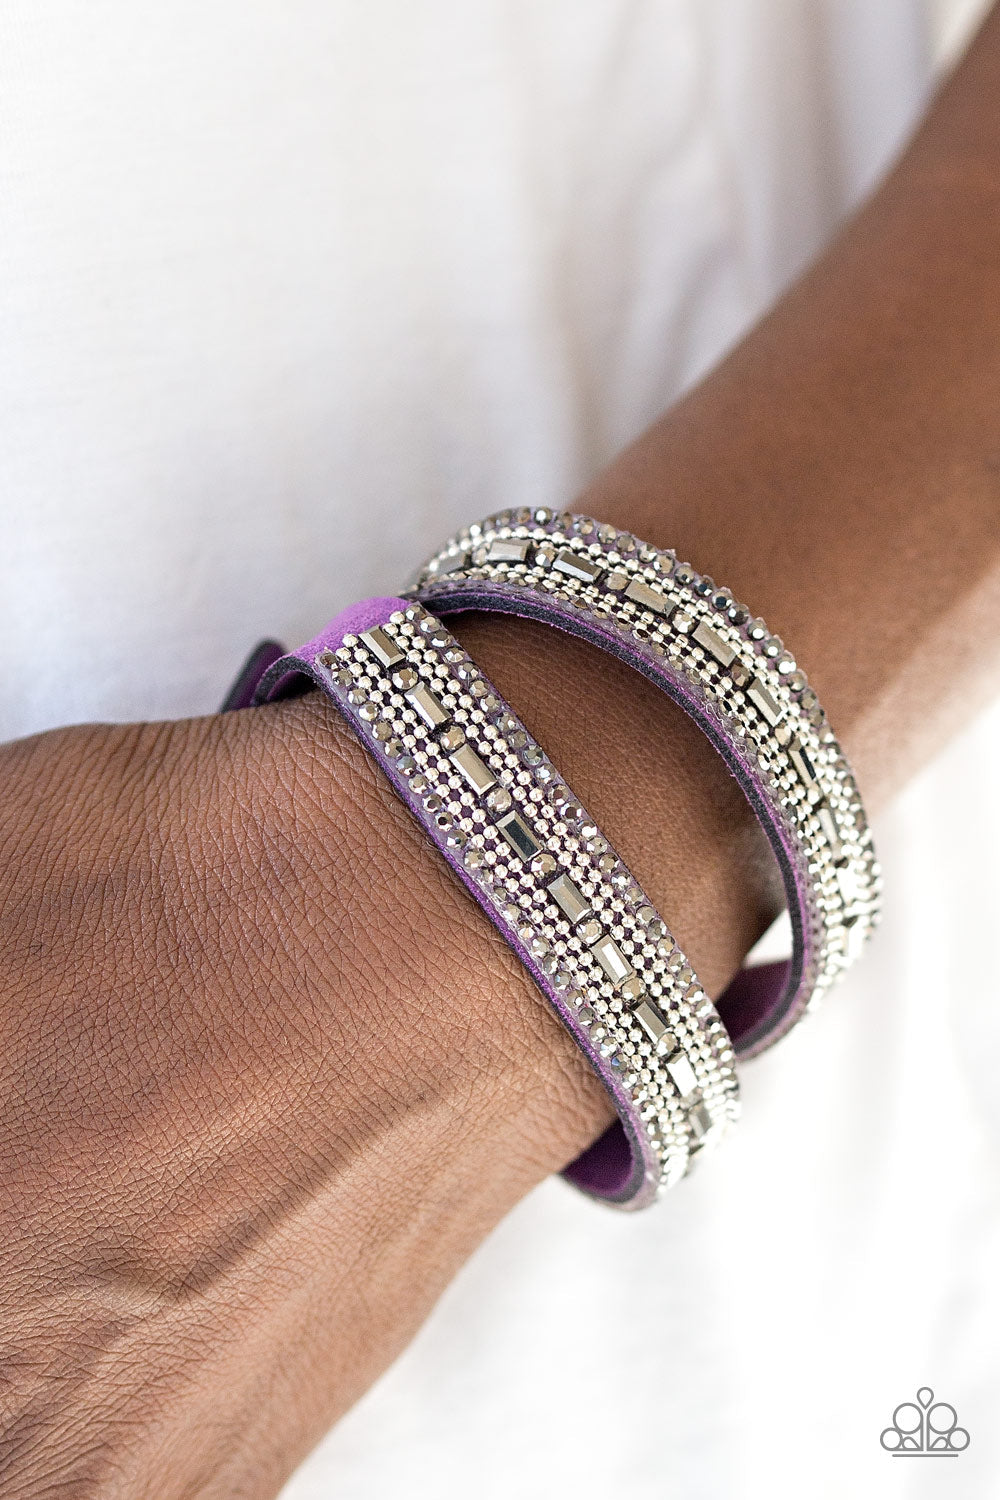 Shimmer and Sass - Purple Suede - Wrap and Snap Bracelet - Paparazzi Accessories - Featuring round and emerald style cuts, glassy hematite rhinestones are encrusted along a purple suede band. Rows of shimmery silver ball chain are pressed into the glittery band for a sassy finish. The elongated band allows for a trendy double wrap design. Features an adjustable snap closure.